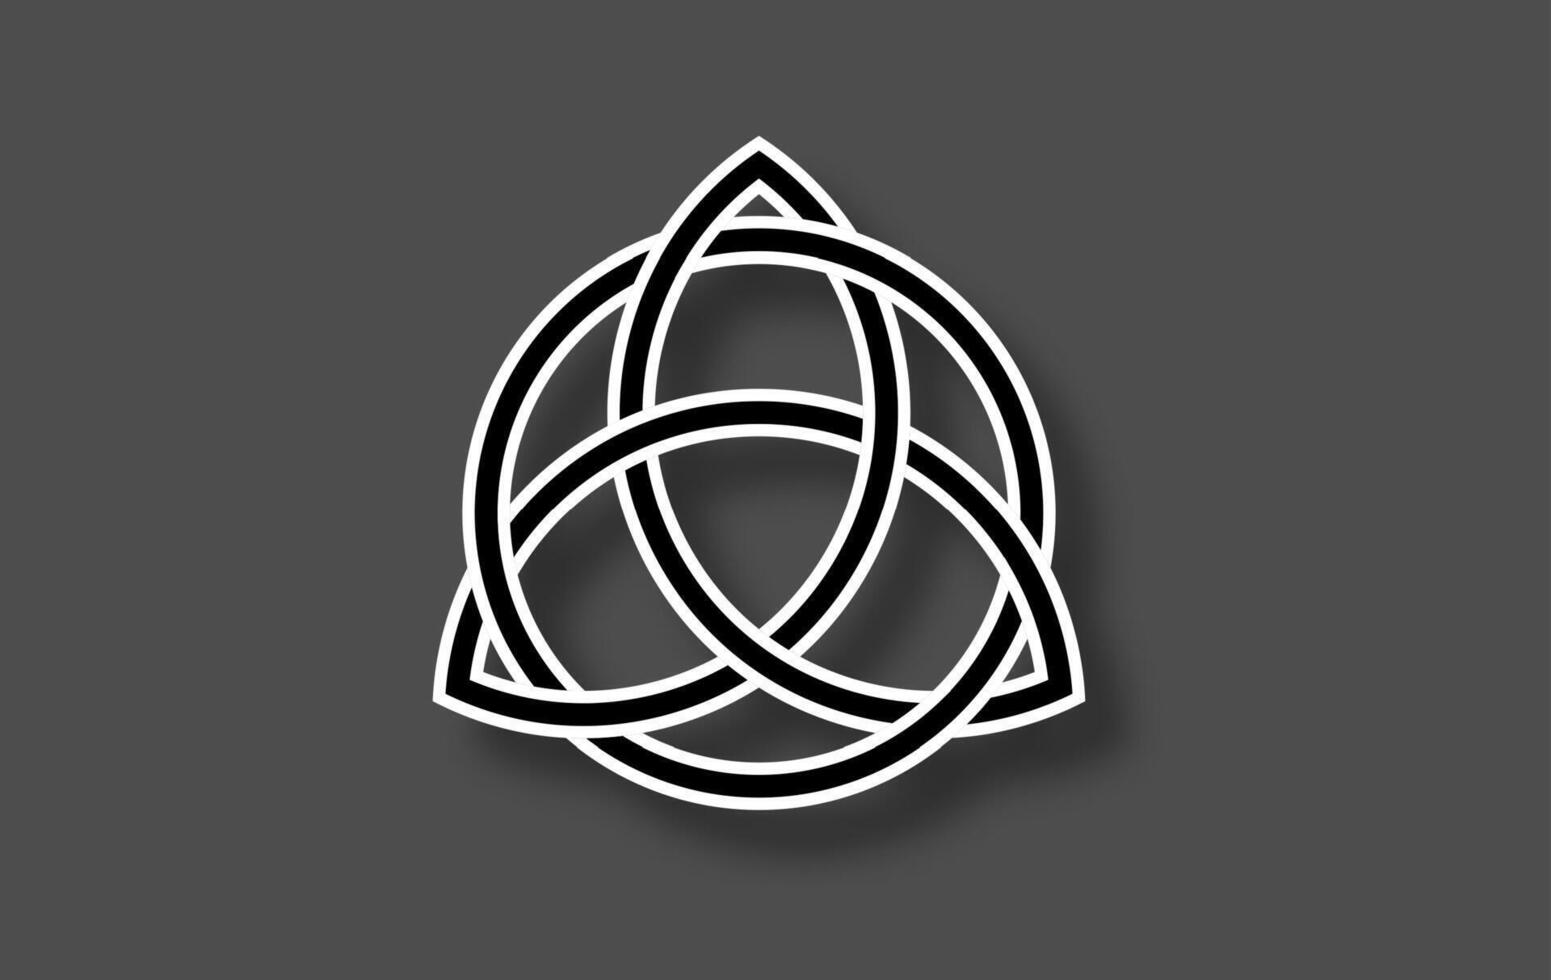 Triquetra geometric logo, Trinity Knot, Wiccan symbol for protection. black and white Celtic knot isolated on gray background. Wicca divination symbol, ancient occult sign vector